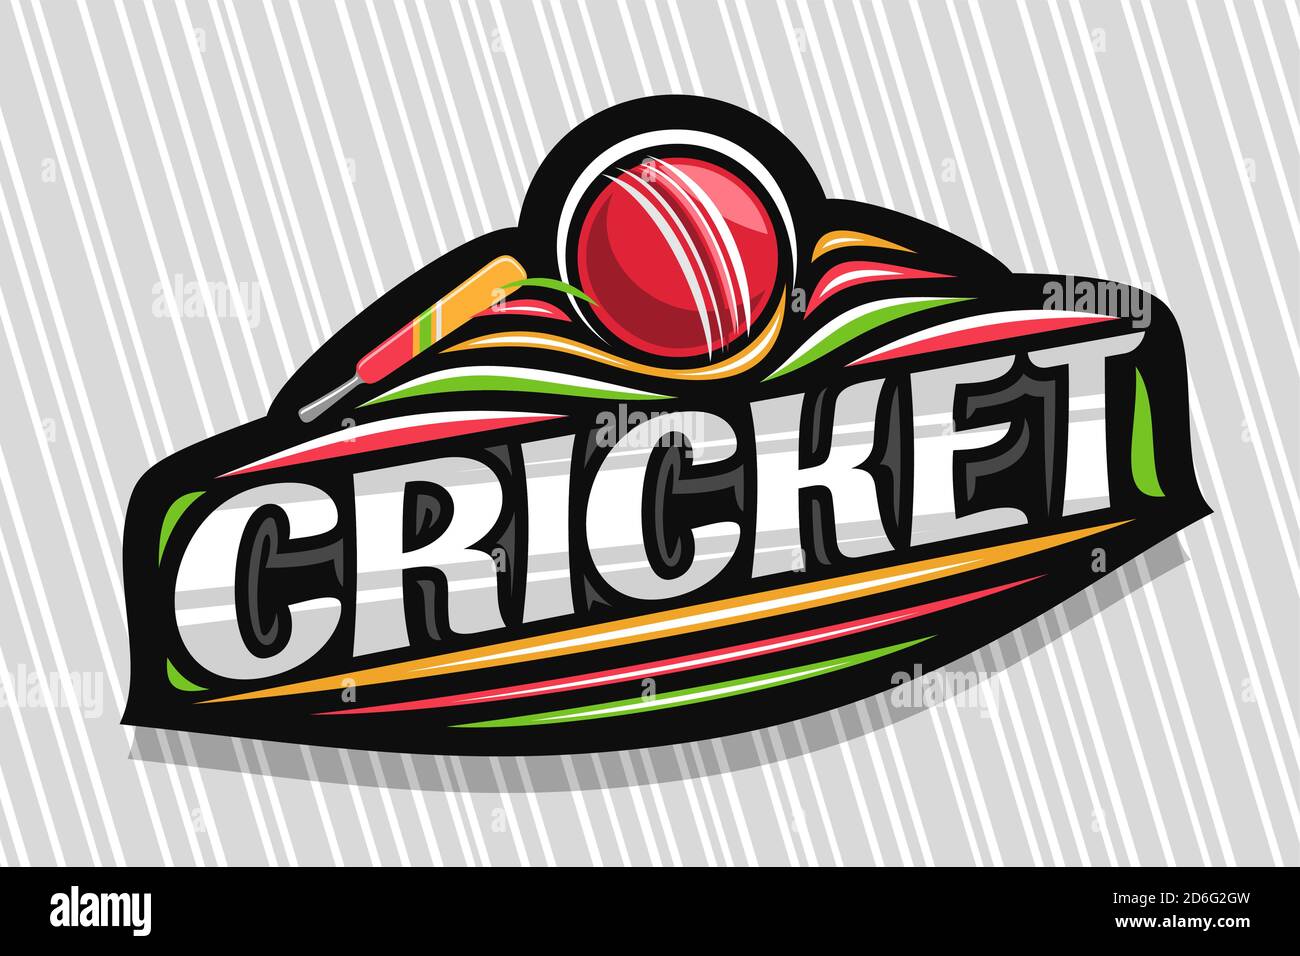 Vector logo for Cricket Sport, dark modern emblem with illustration of flying ball in goal and bat, unique lettering for grey word cricket, sports sig Stock Vector